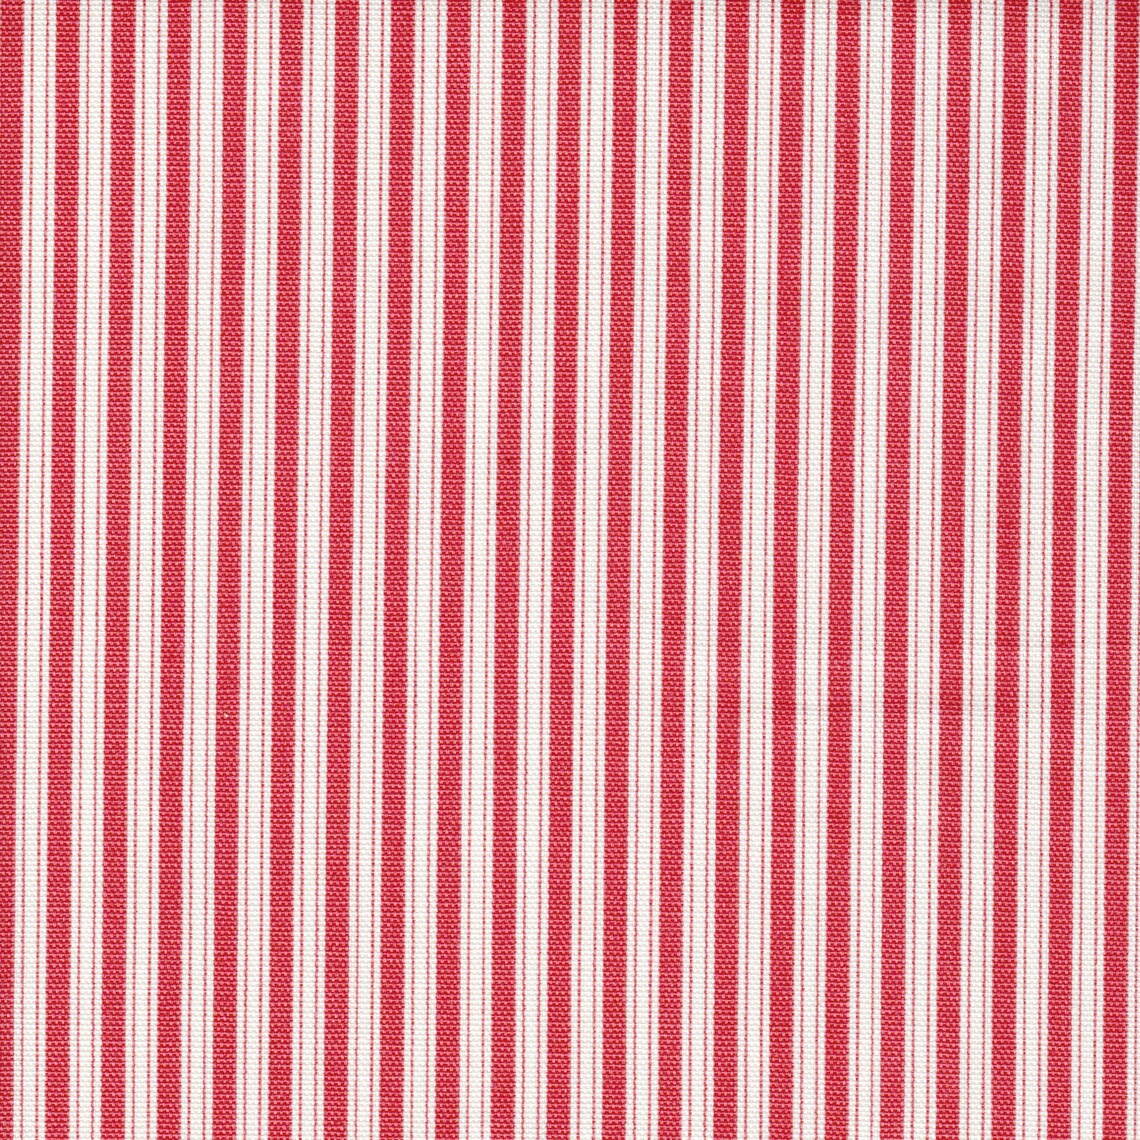 gathered bedskirt in Polo Calypso Rose Red Stripe on Off-White